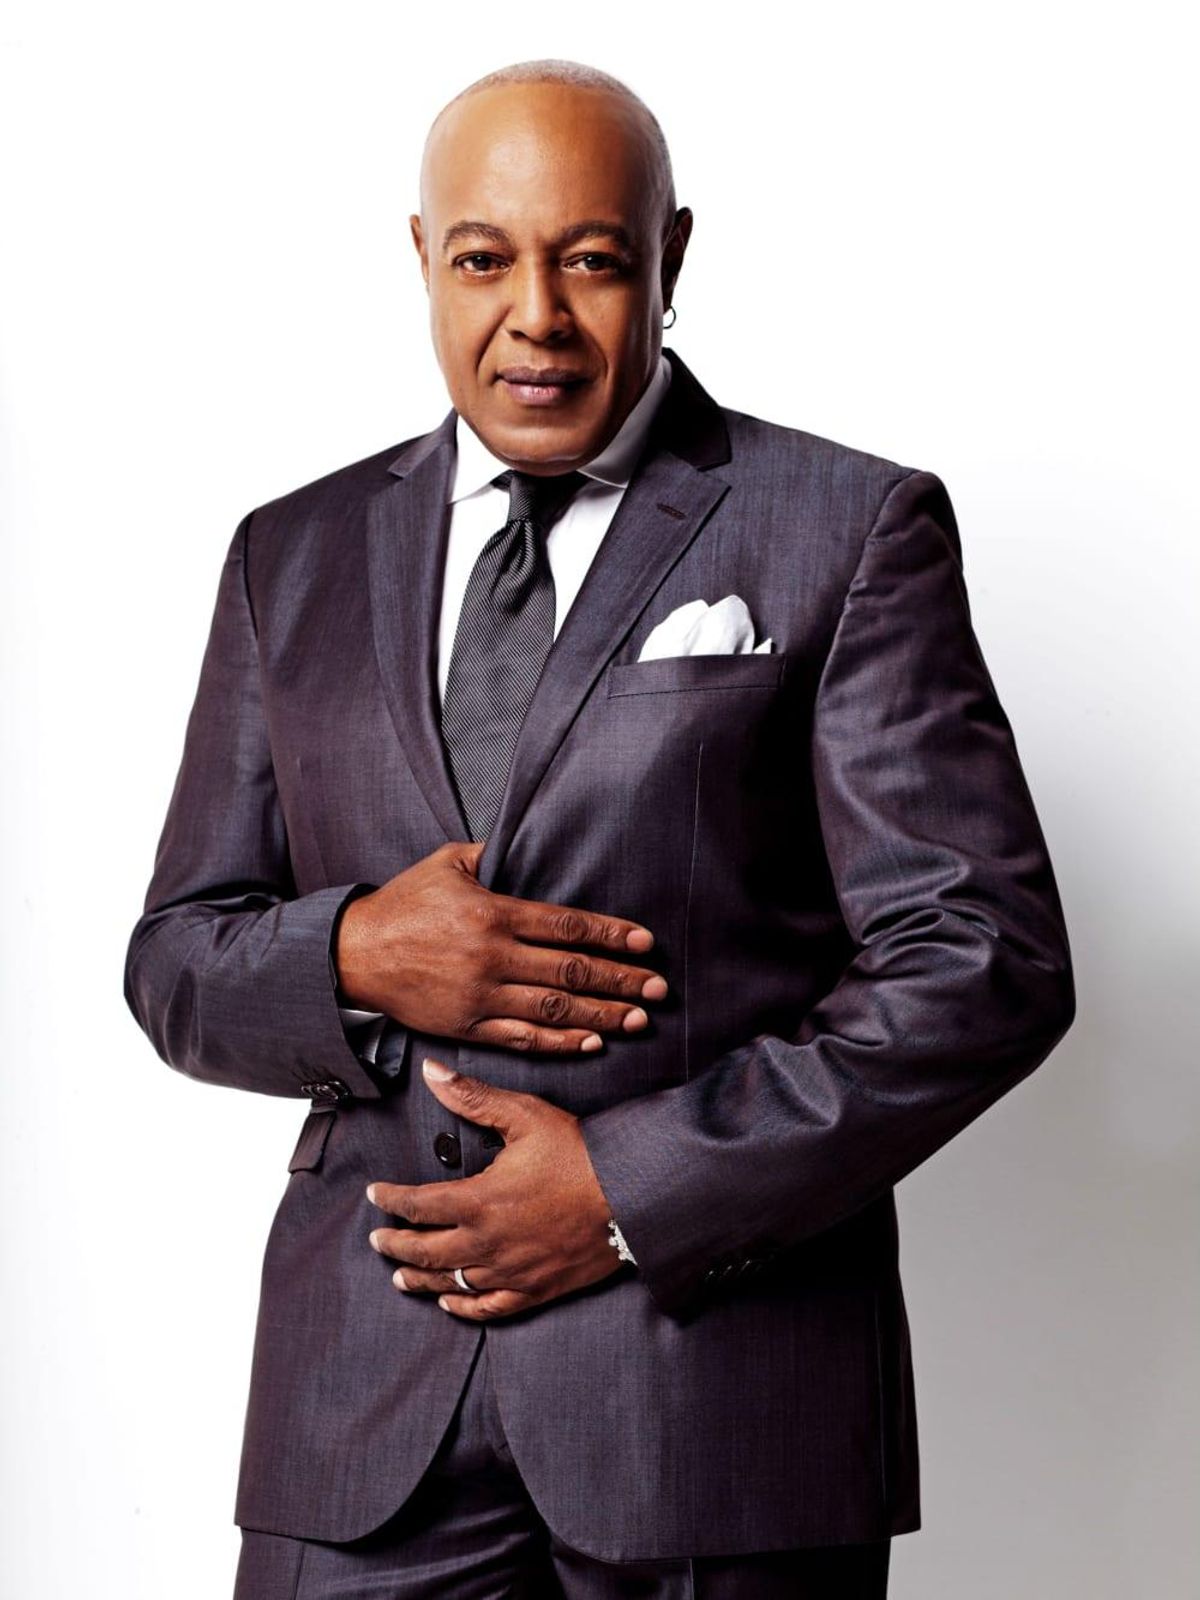 Peabo Bryson will host and perform at The Colors of Christmas, taking